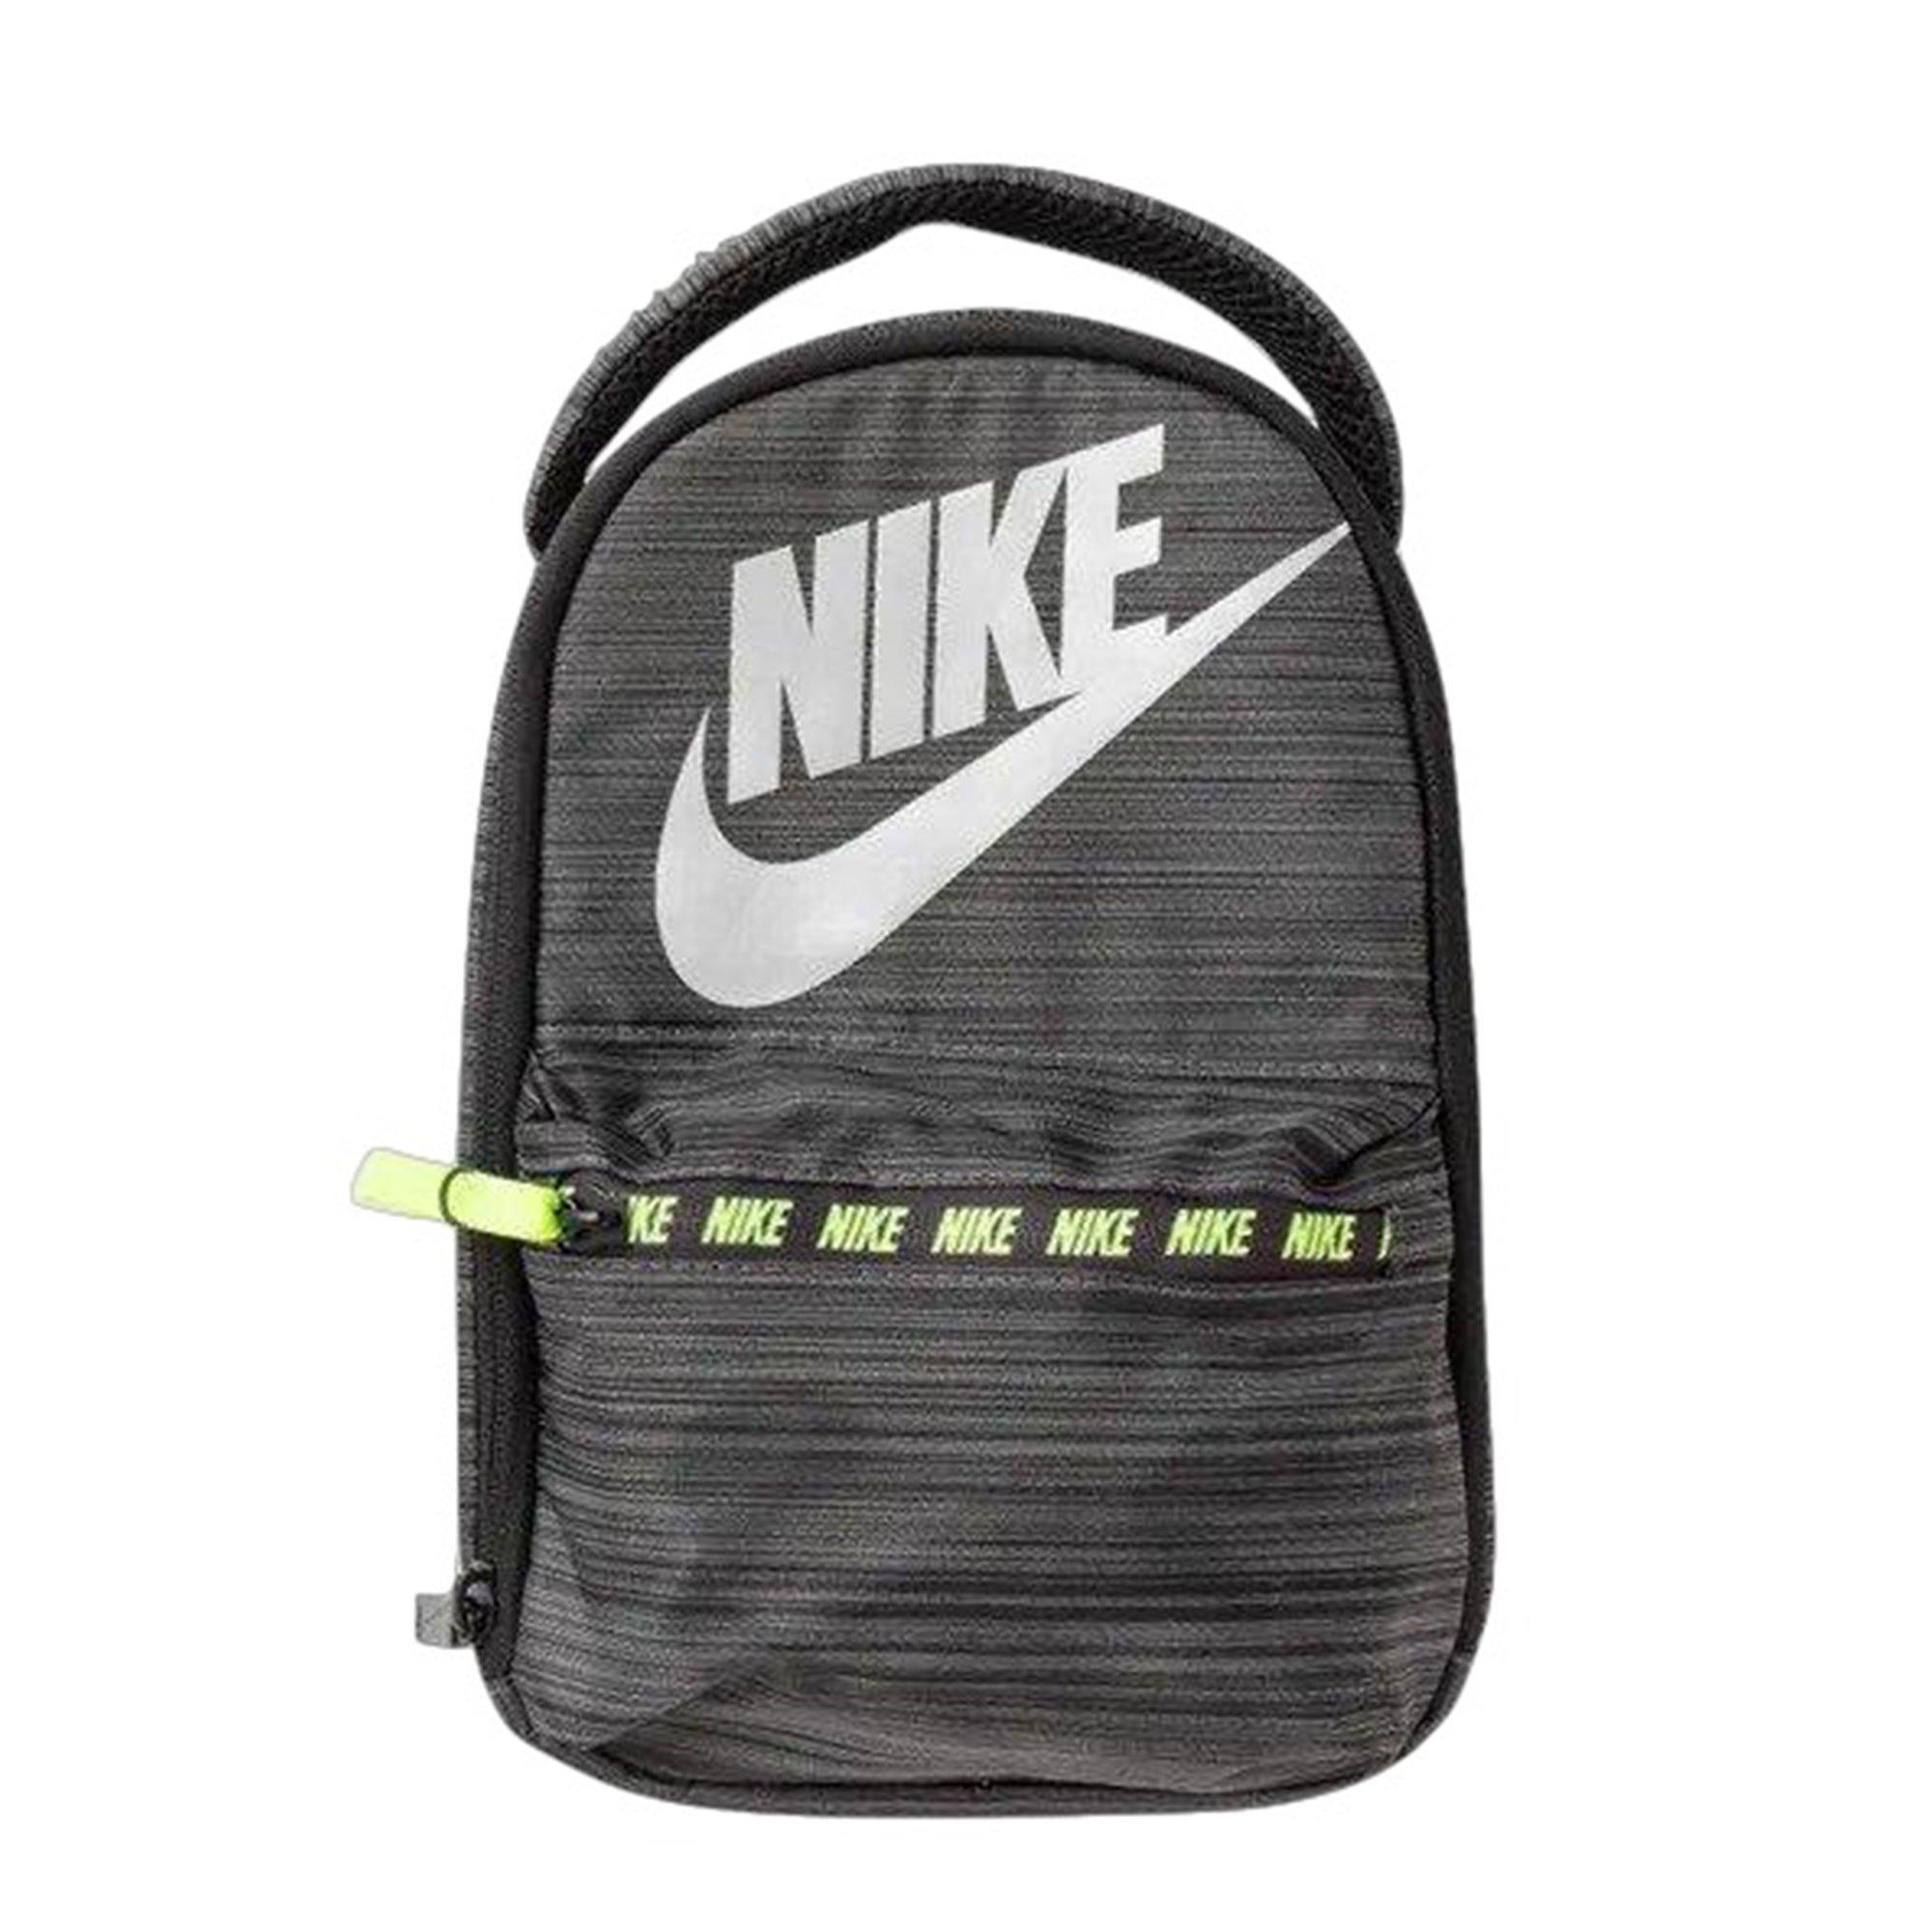  Nike Futura Fuel Tote Black One Size : Clothing, Shoes